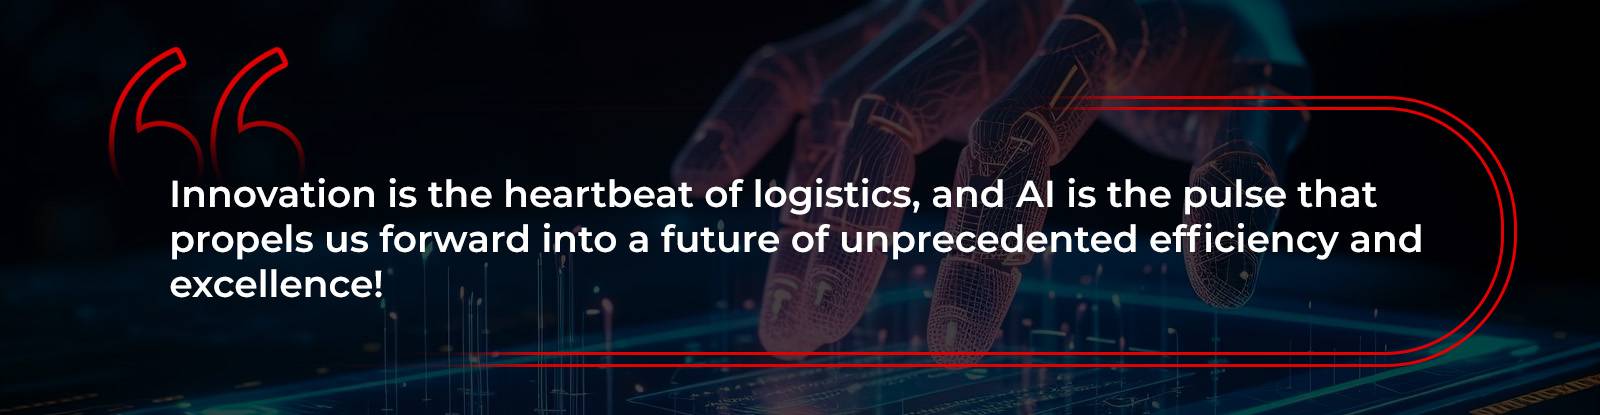 What are top players and CEO saying about use of AI in logistics